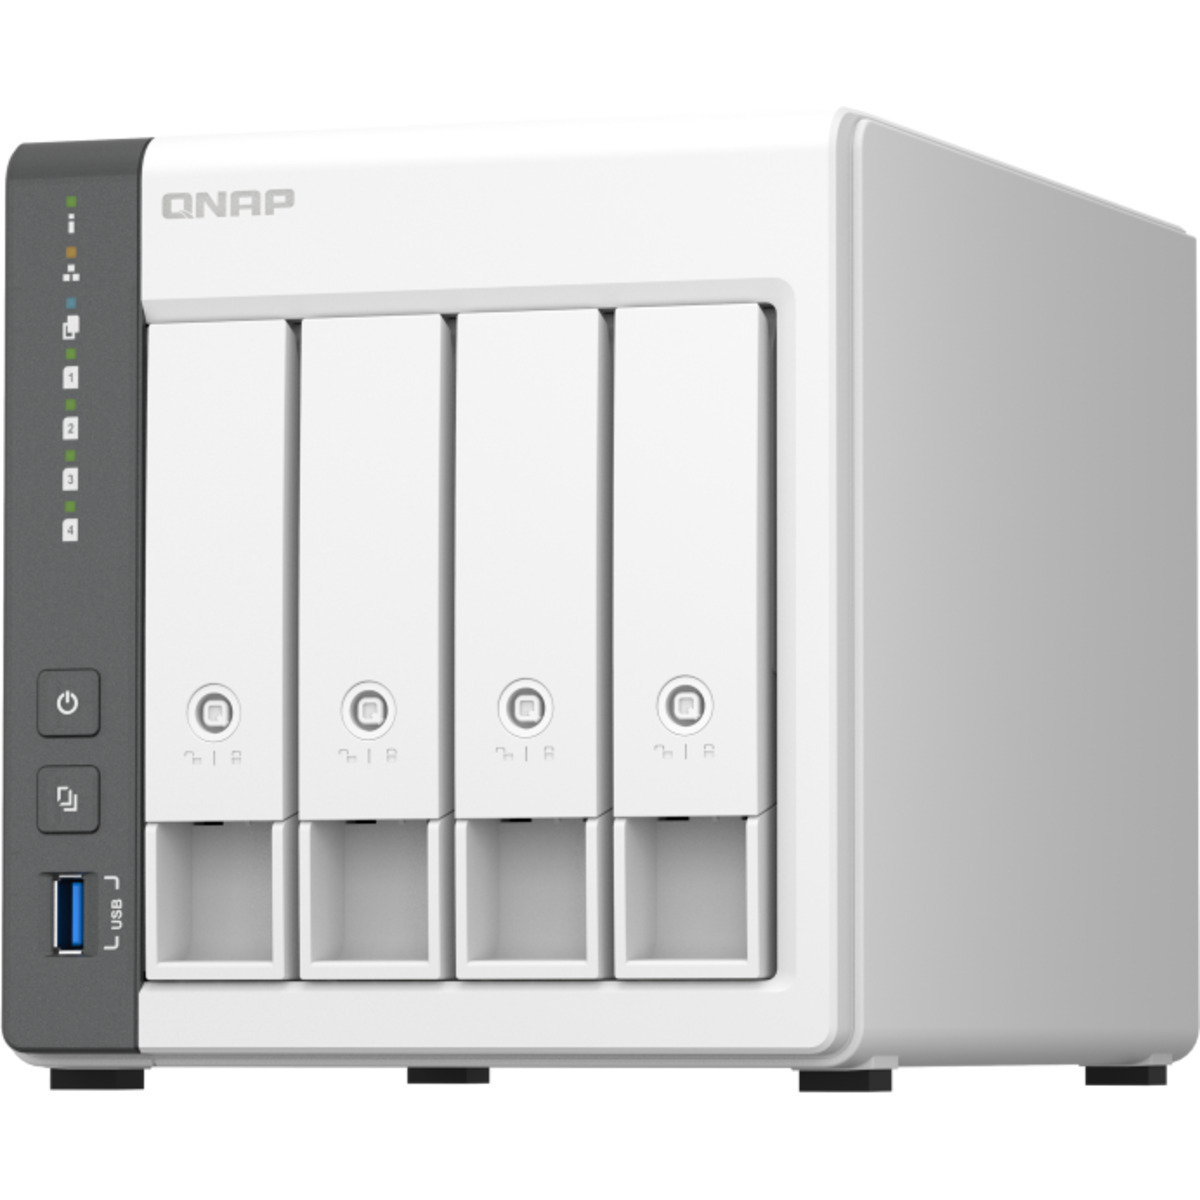 buy $642 QNAP TS-433 16tb Desktop NAS - Network Attached Storage Device 4x4000gb Toshiba MN Series MN08ADA400E 3.5 7200rpm SATA 6Gb/s HDD NAS Class Drives Installed - Burn-In Tested - ON SALE - nas headquarters buy network attached storage server device das new raid-5 free shipping simply usa TS-433